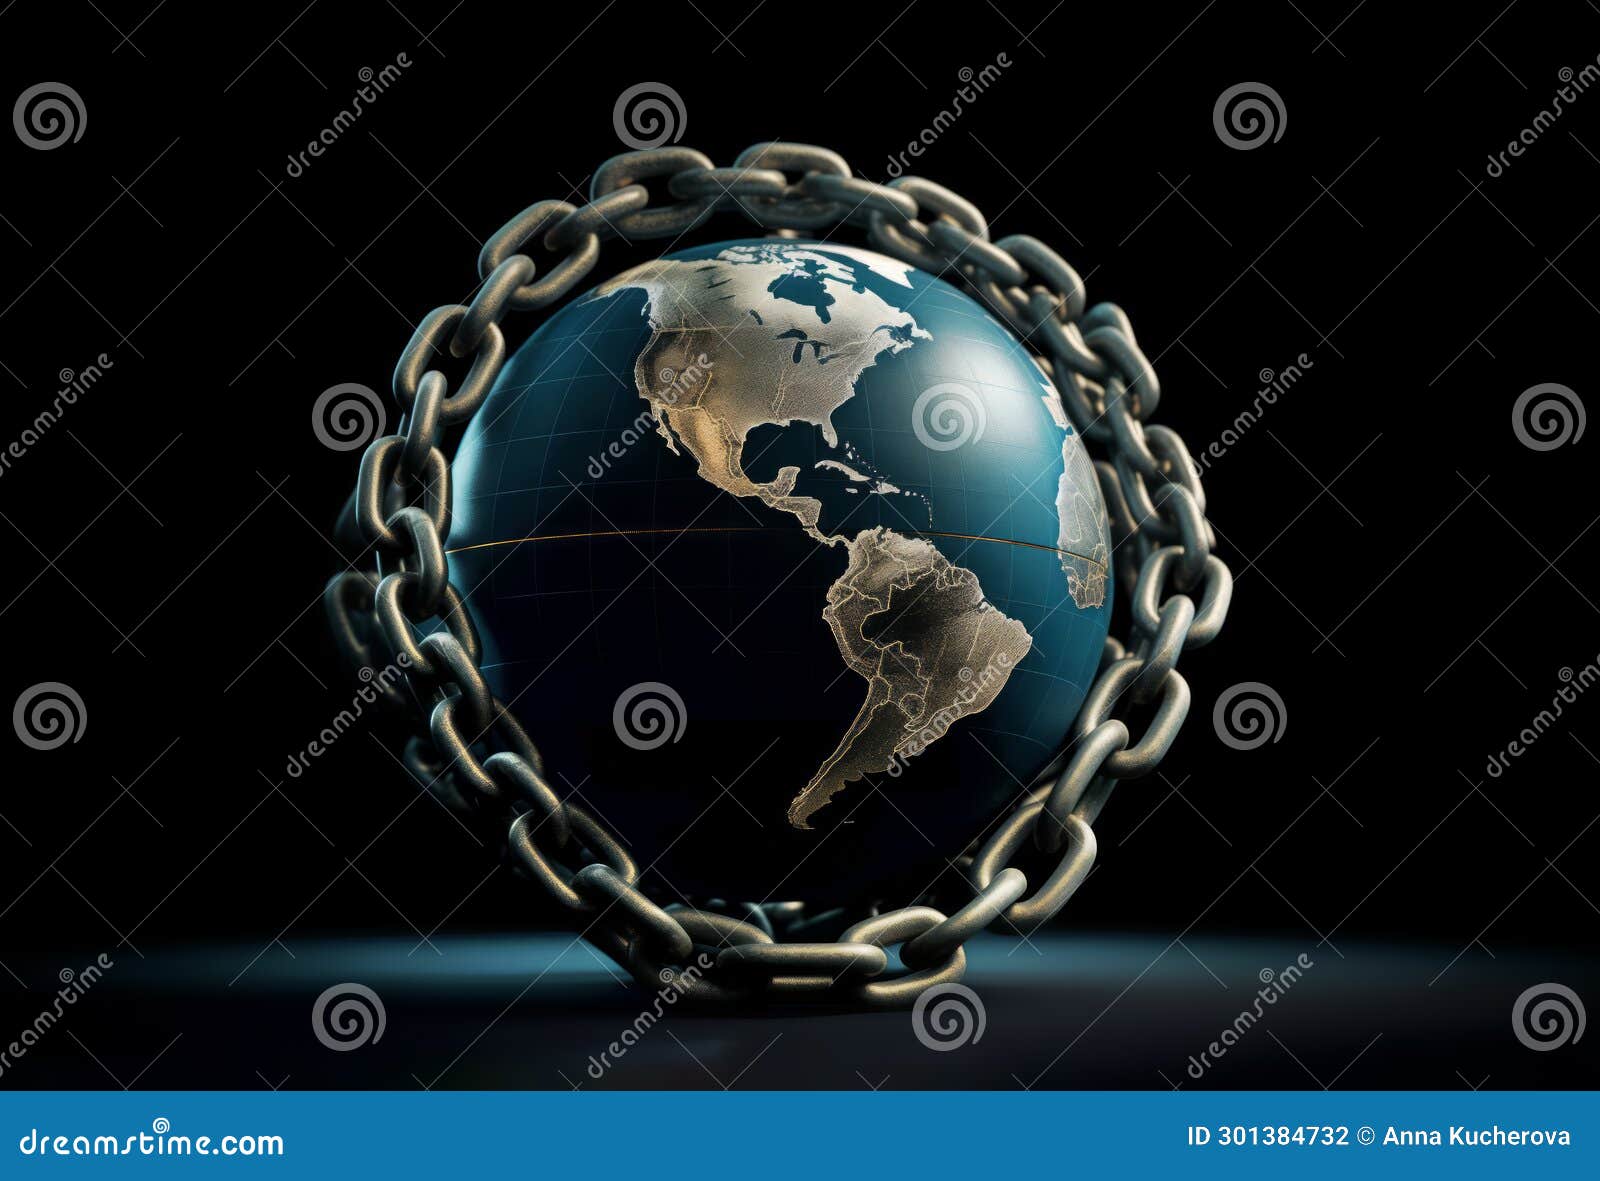 conceptual image of the earth encircled by a chain, izing environmental issues or geopolitical constraints, on dark backdrop